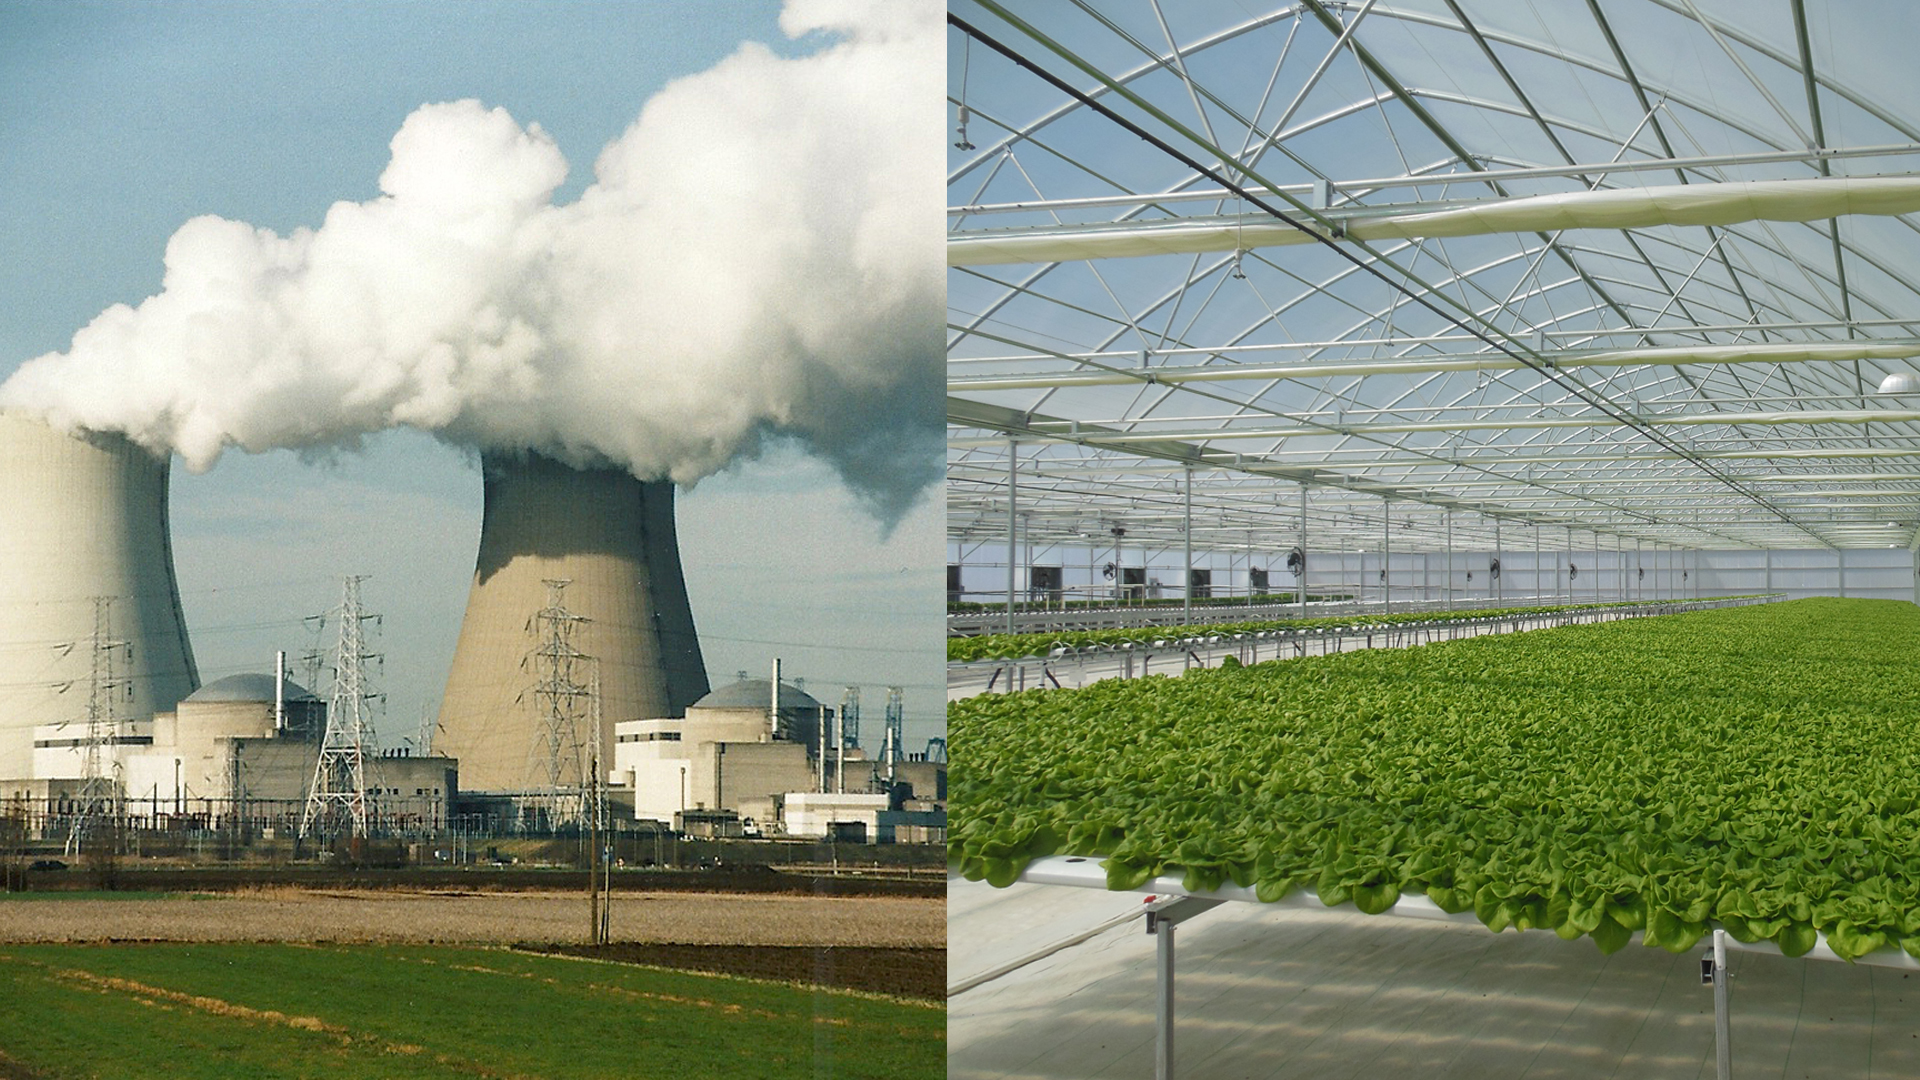 NPRE, Crop Sciences join Exelon to study re-using lost nuclear power plant heat for greenhouse, biofuel needs